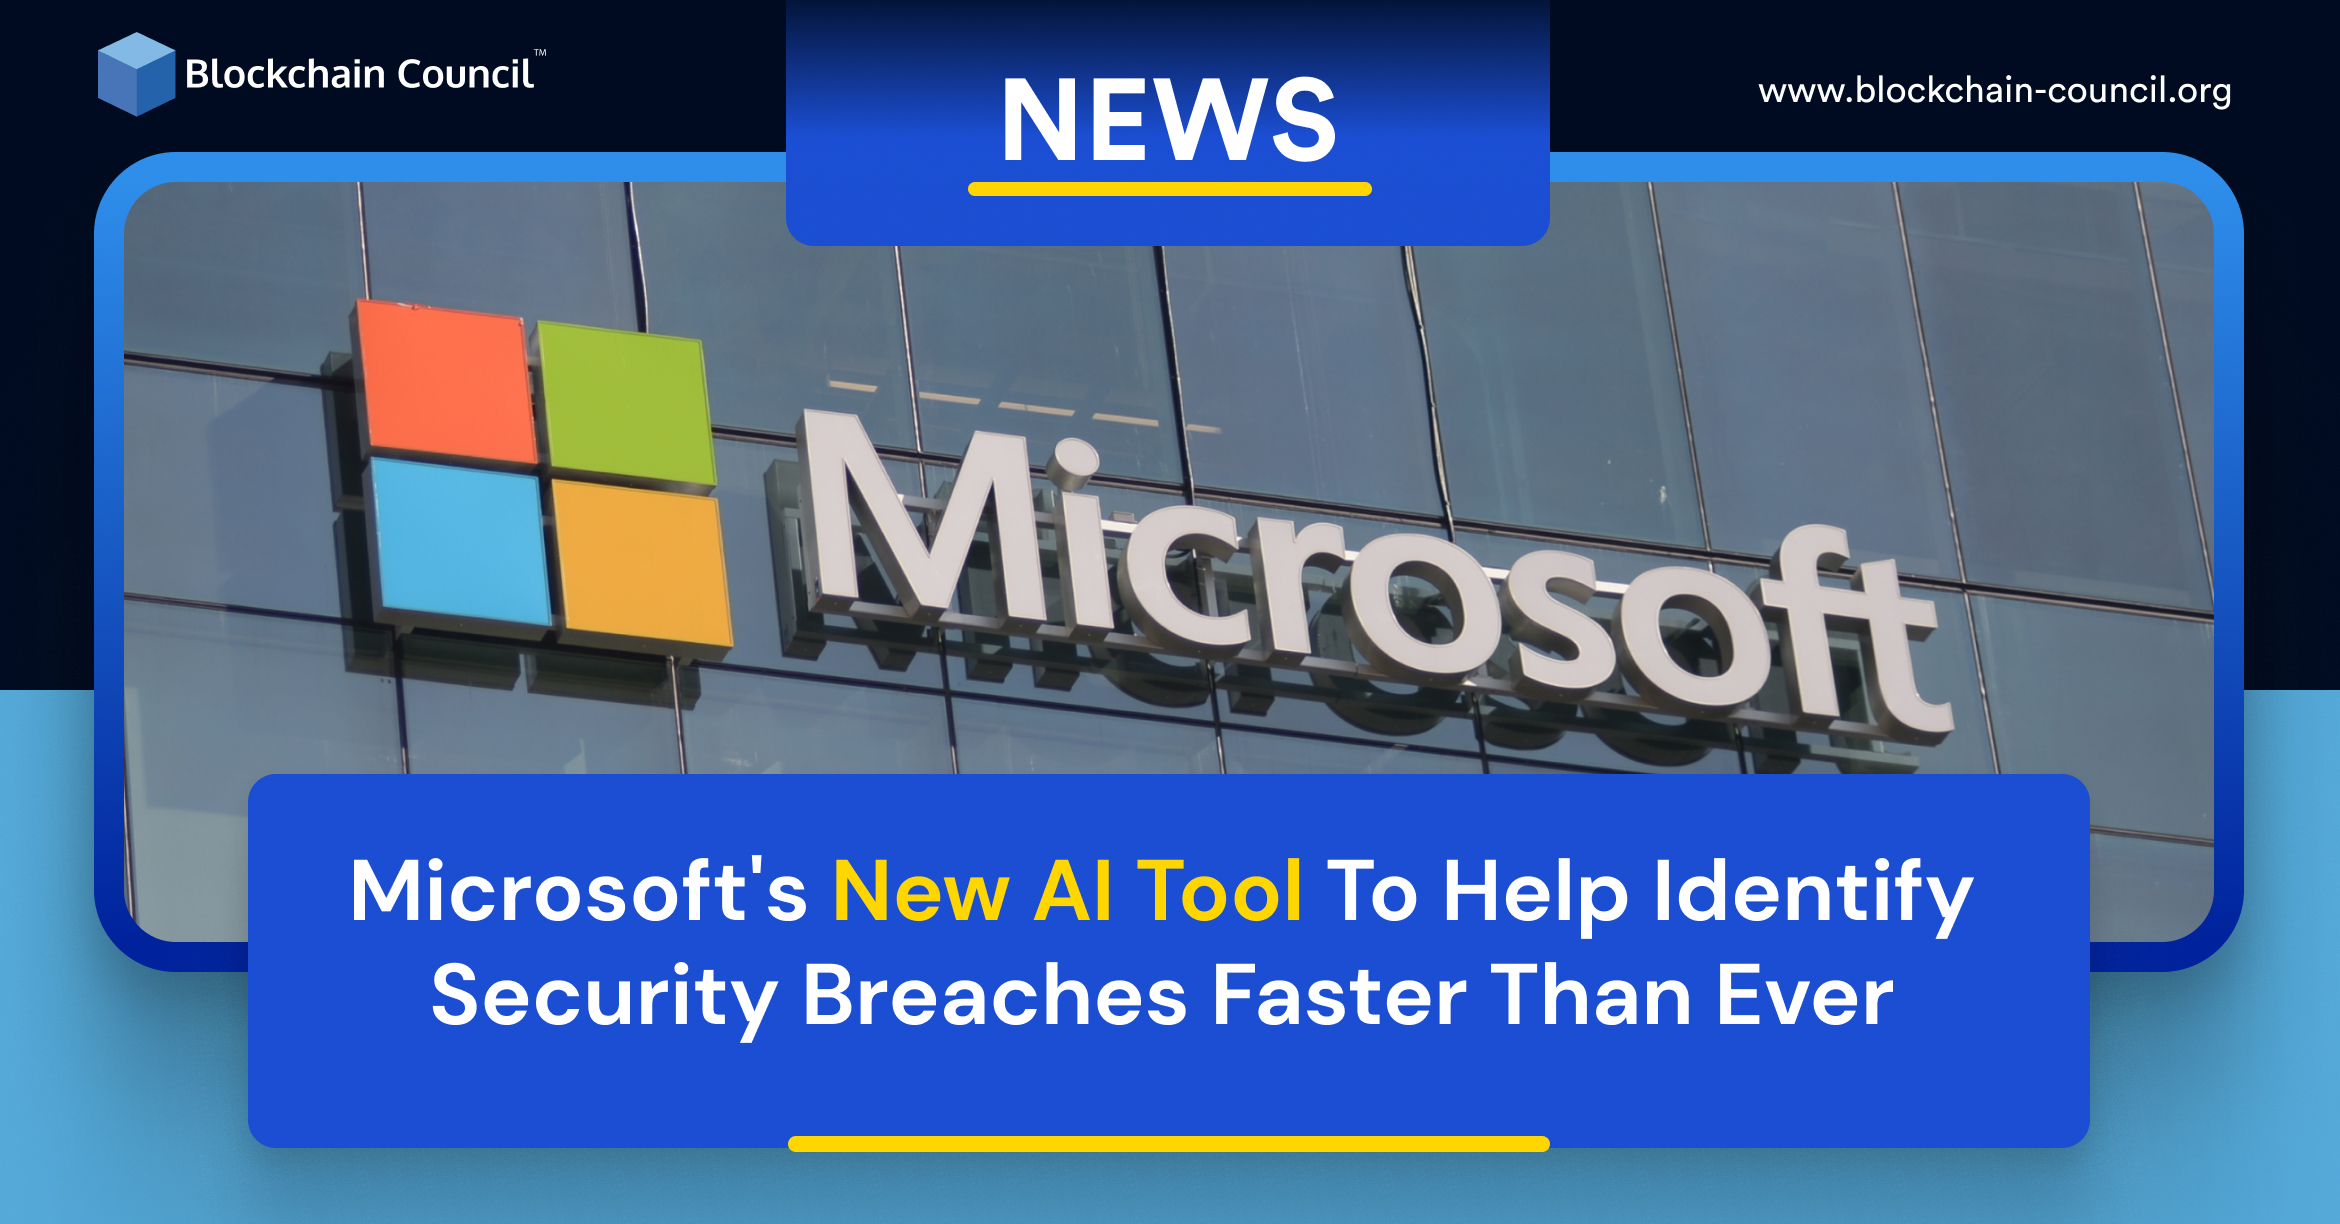 Microsoft's New AI Tool To Help Identify Security Breaches Faster Than Ever